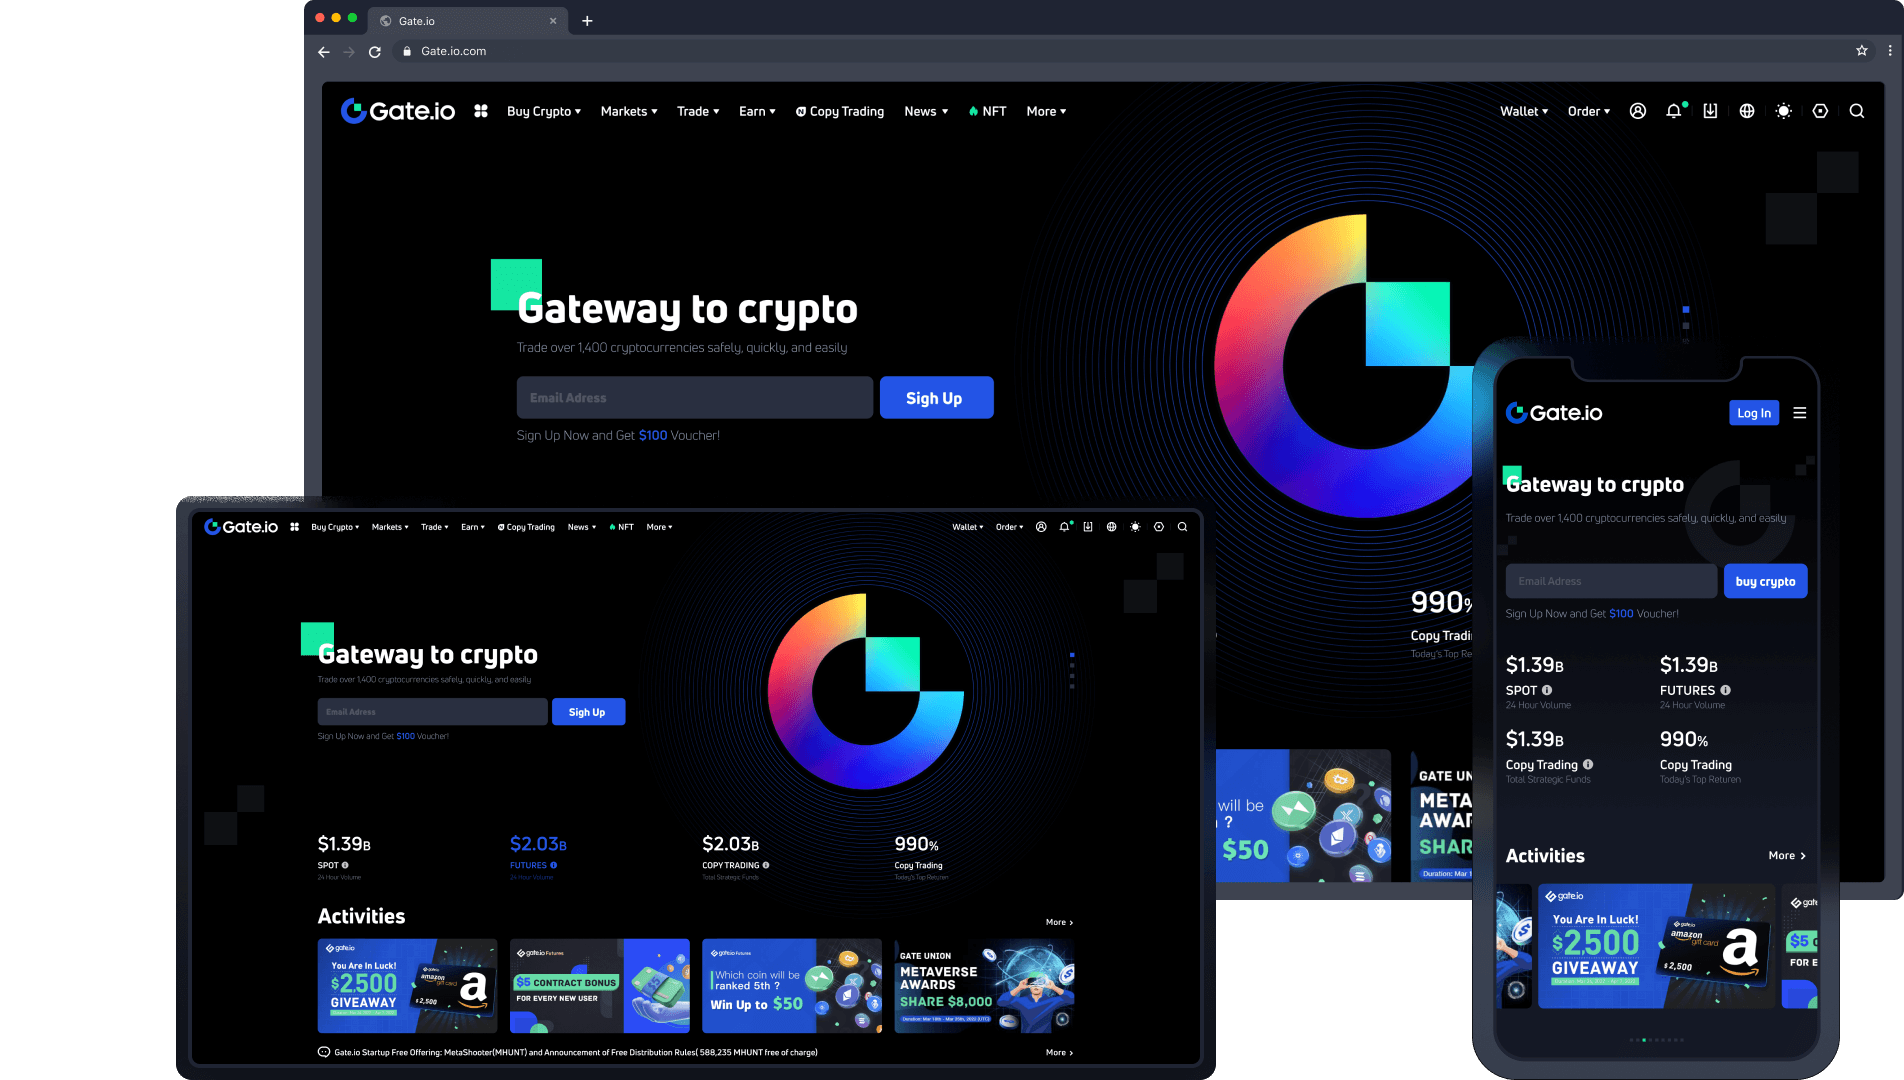 Homepage desktop, tablet and mobile app view- Gate.io